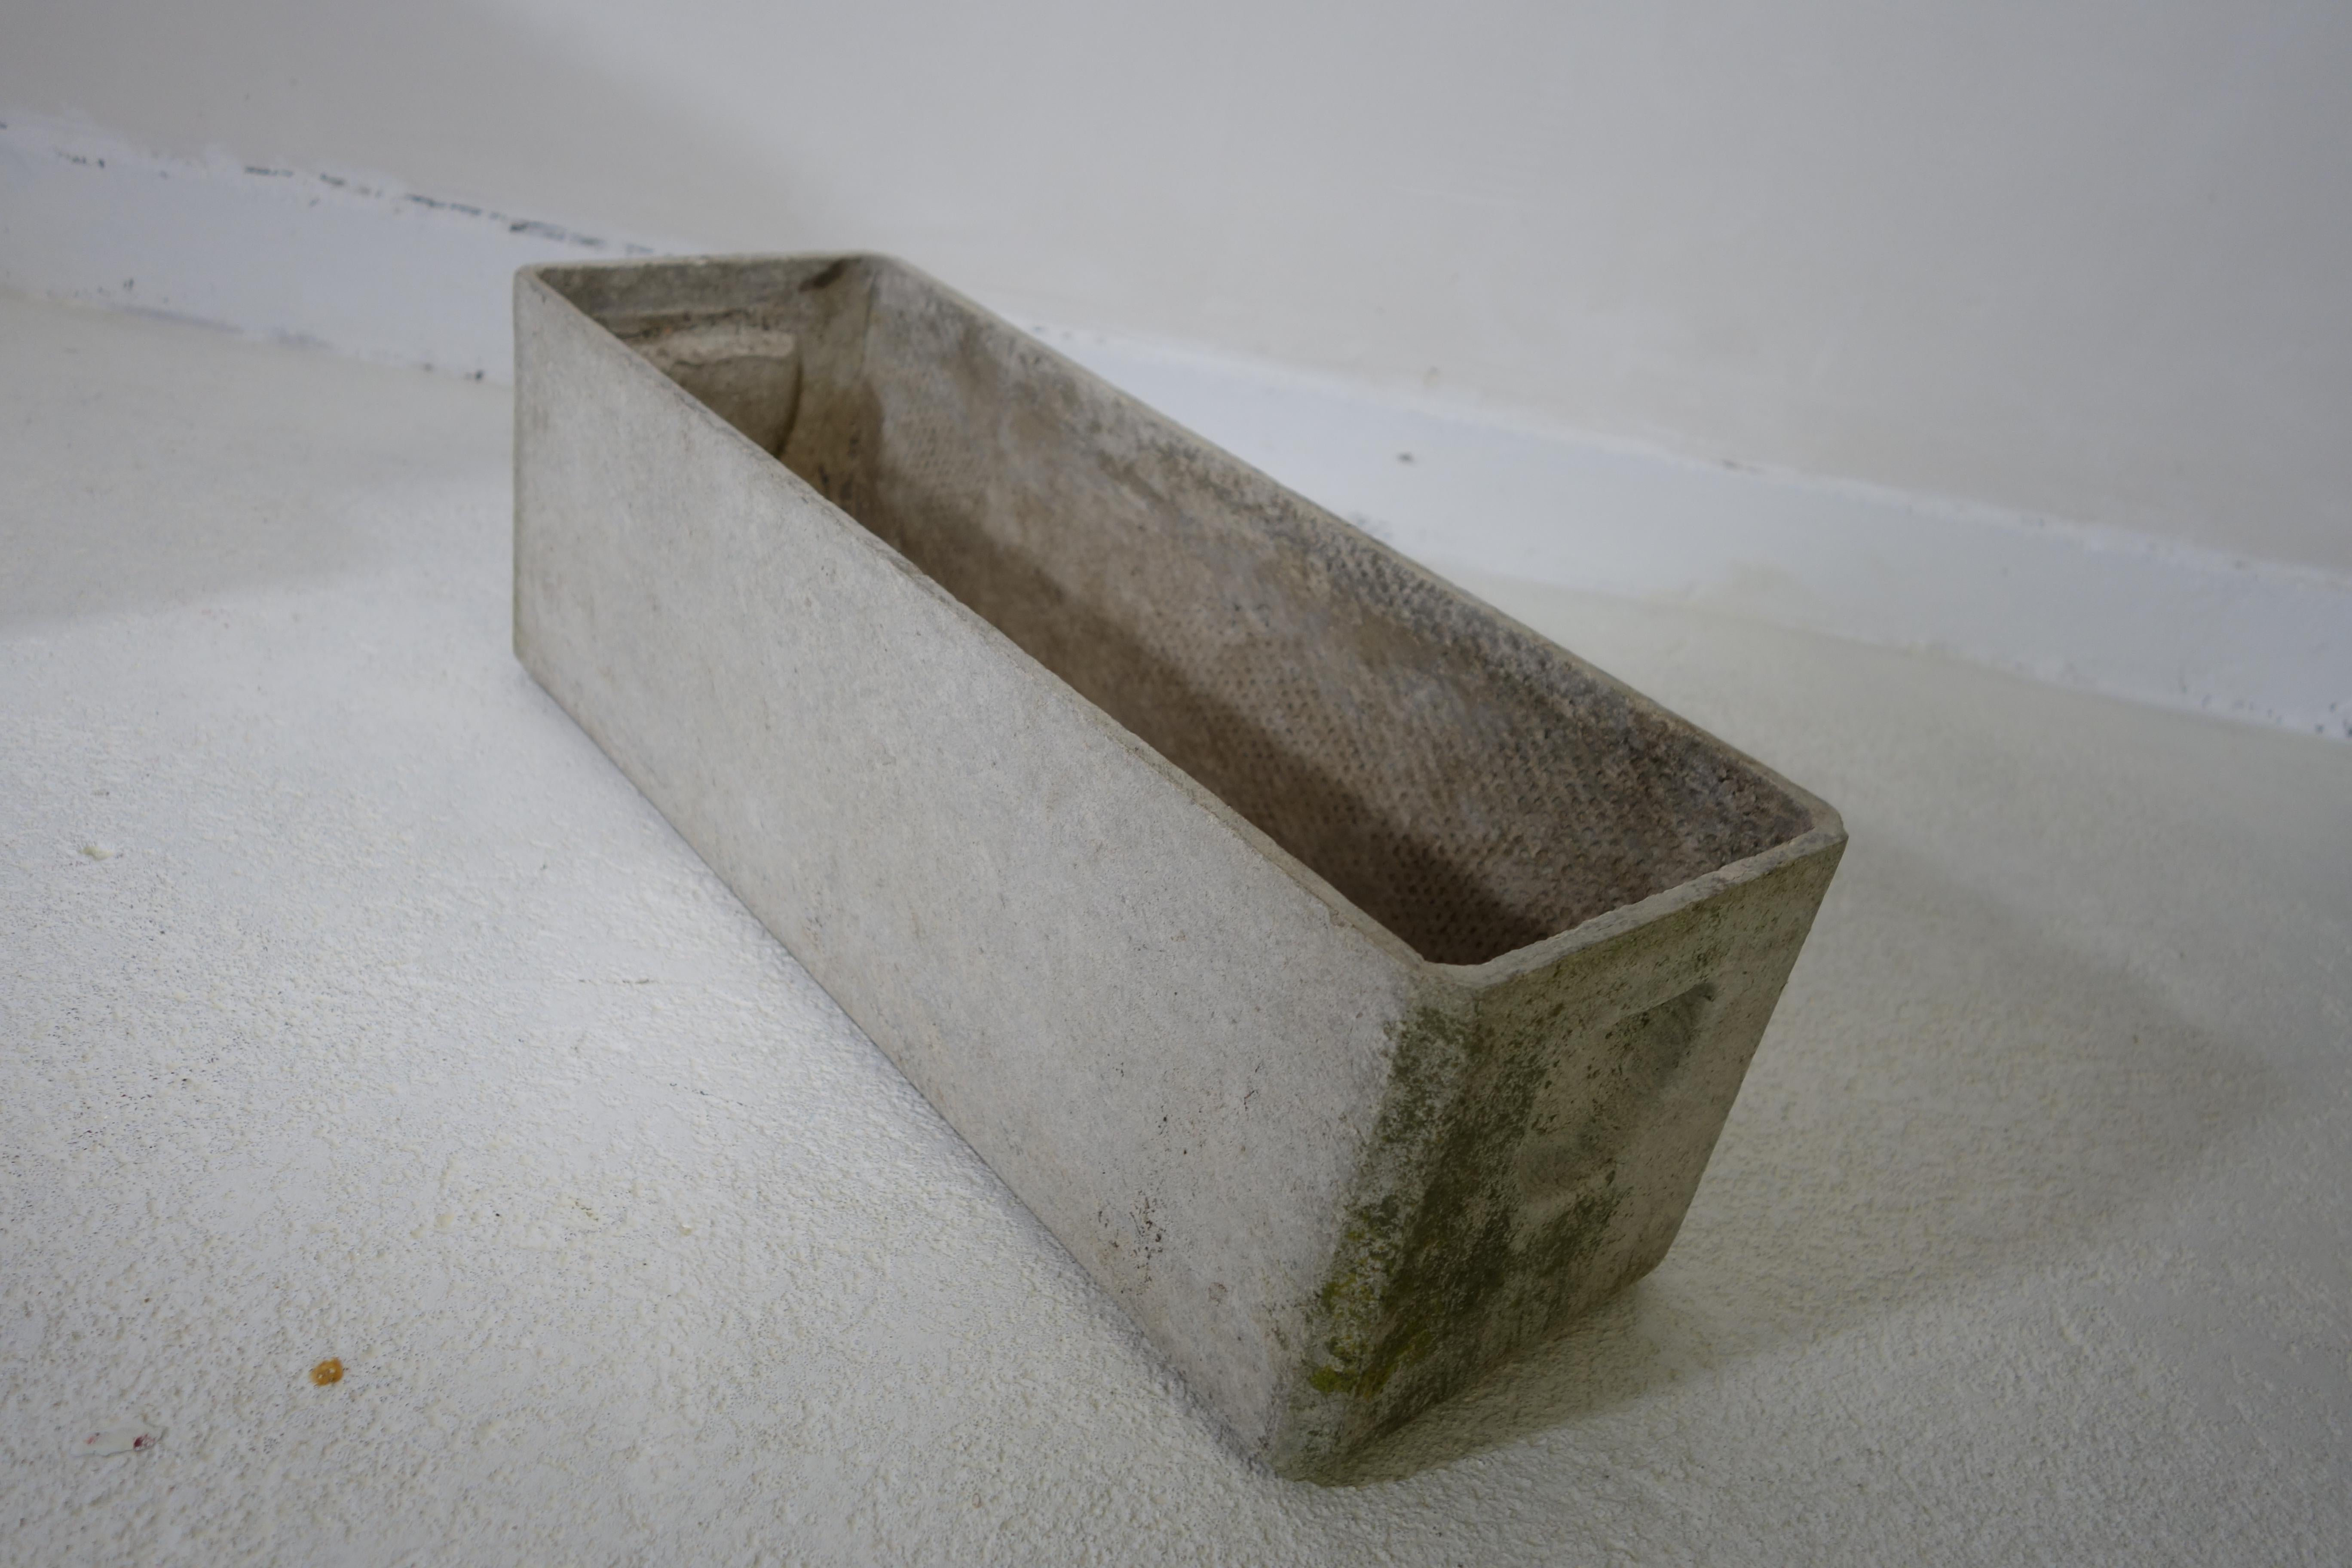 Rectangular planters designed by Swiss architect Willy Guhl for Eternit.
The planters are made of moulded cement. The holes in its bottom allow for water drainage.
These planters are in good vintage condition with a nice patina.